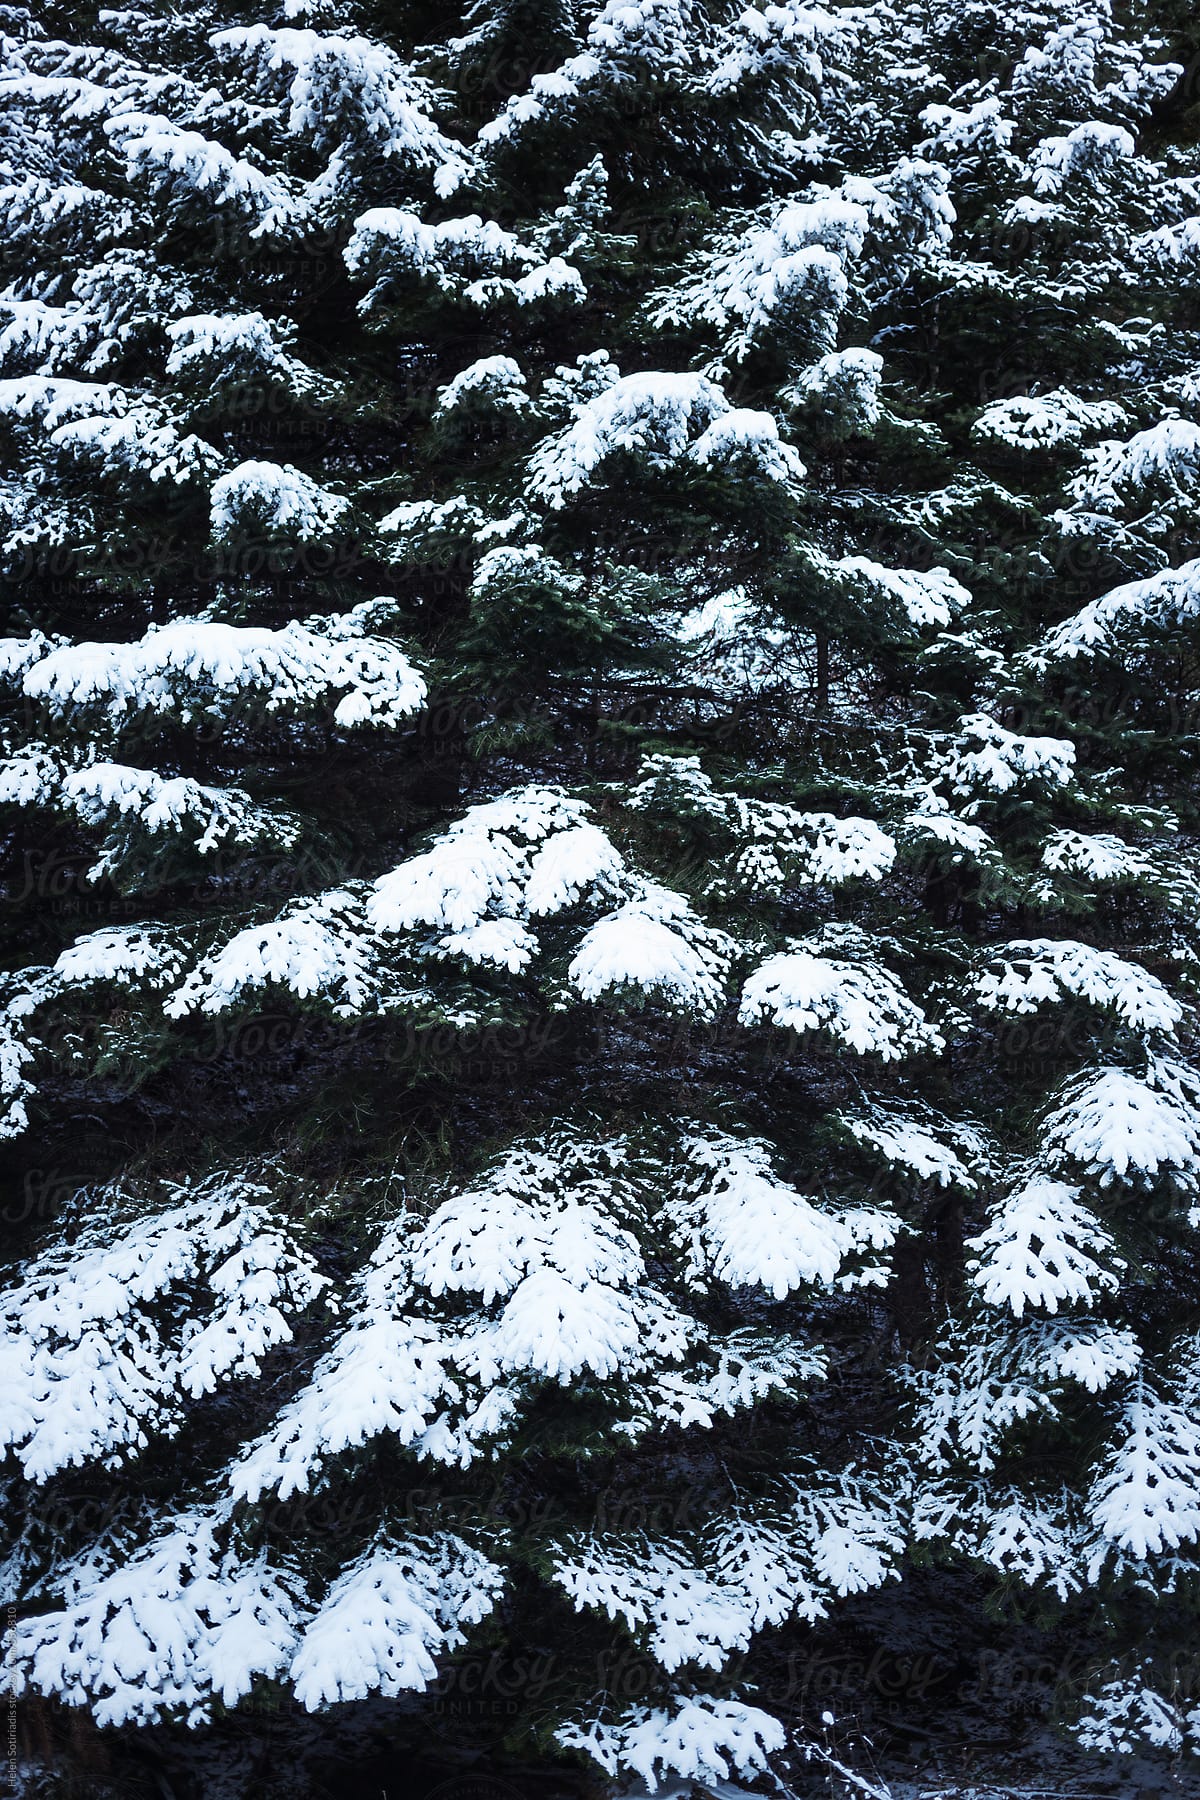 Coniferous Trees with Snow on Branches